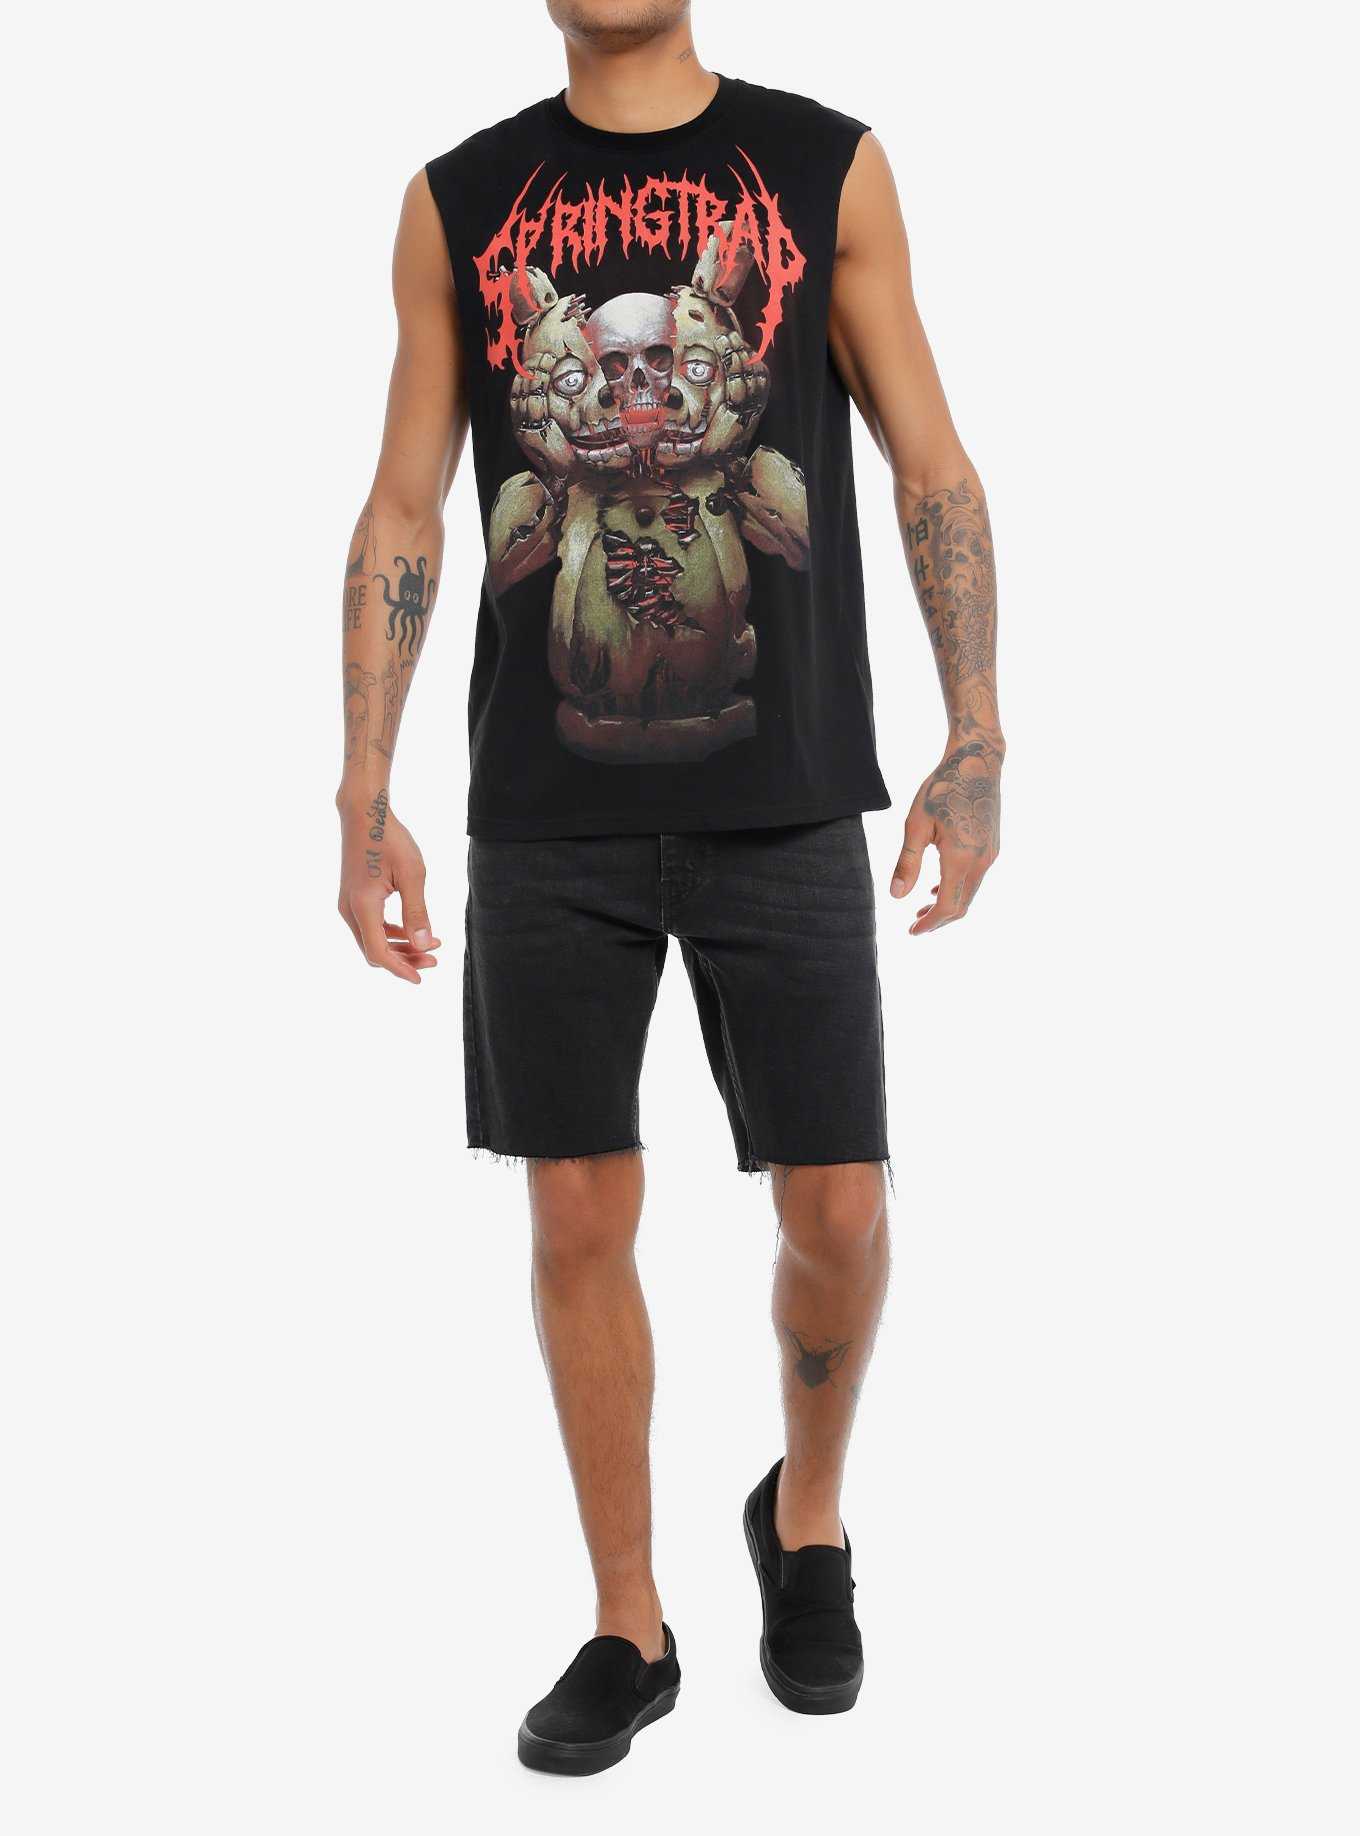 Five Nights At Freddy's Springtrap Muscle Tank Top, , hi-res